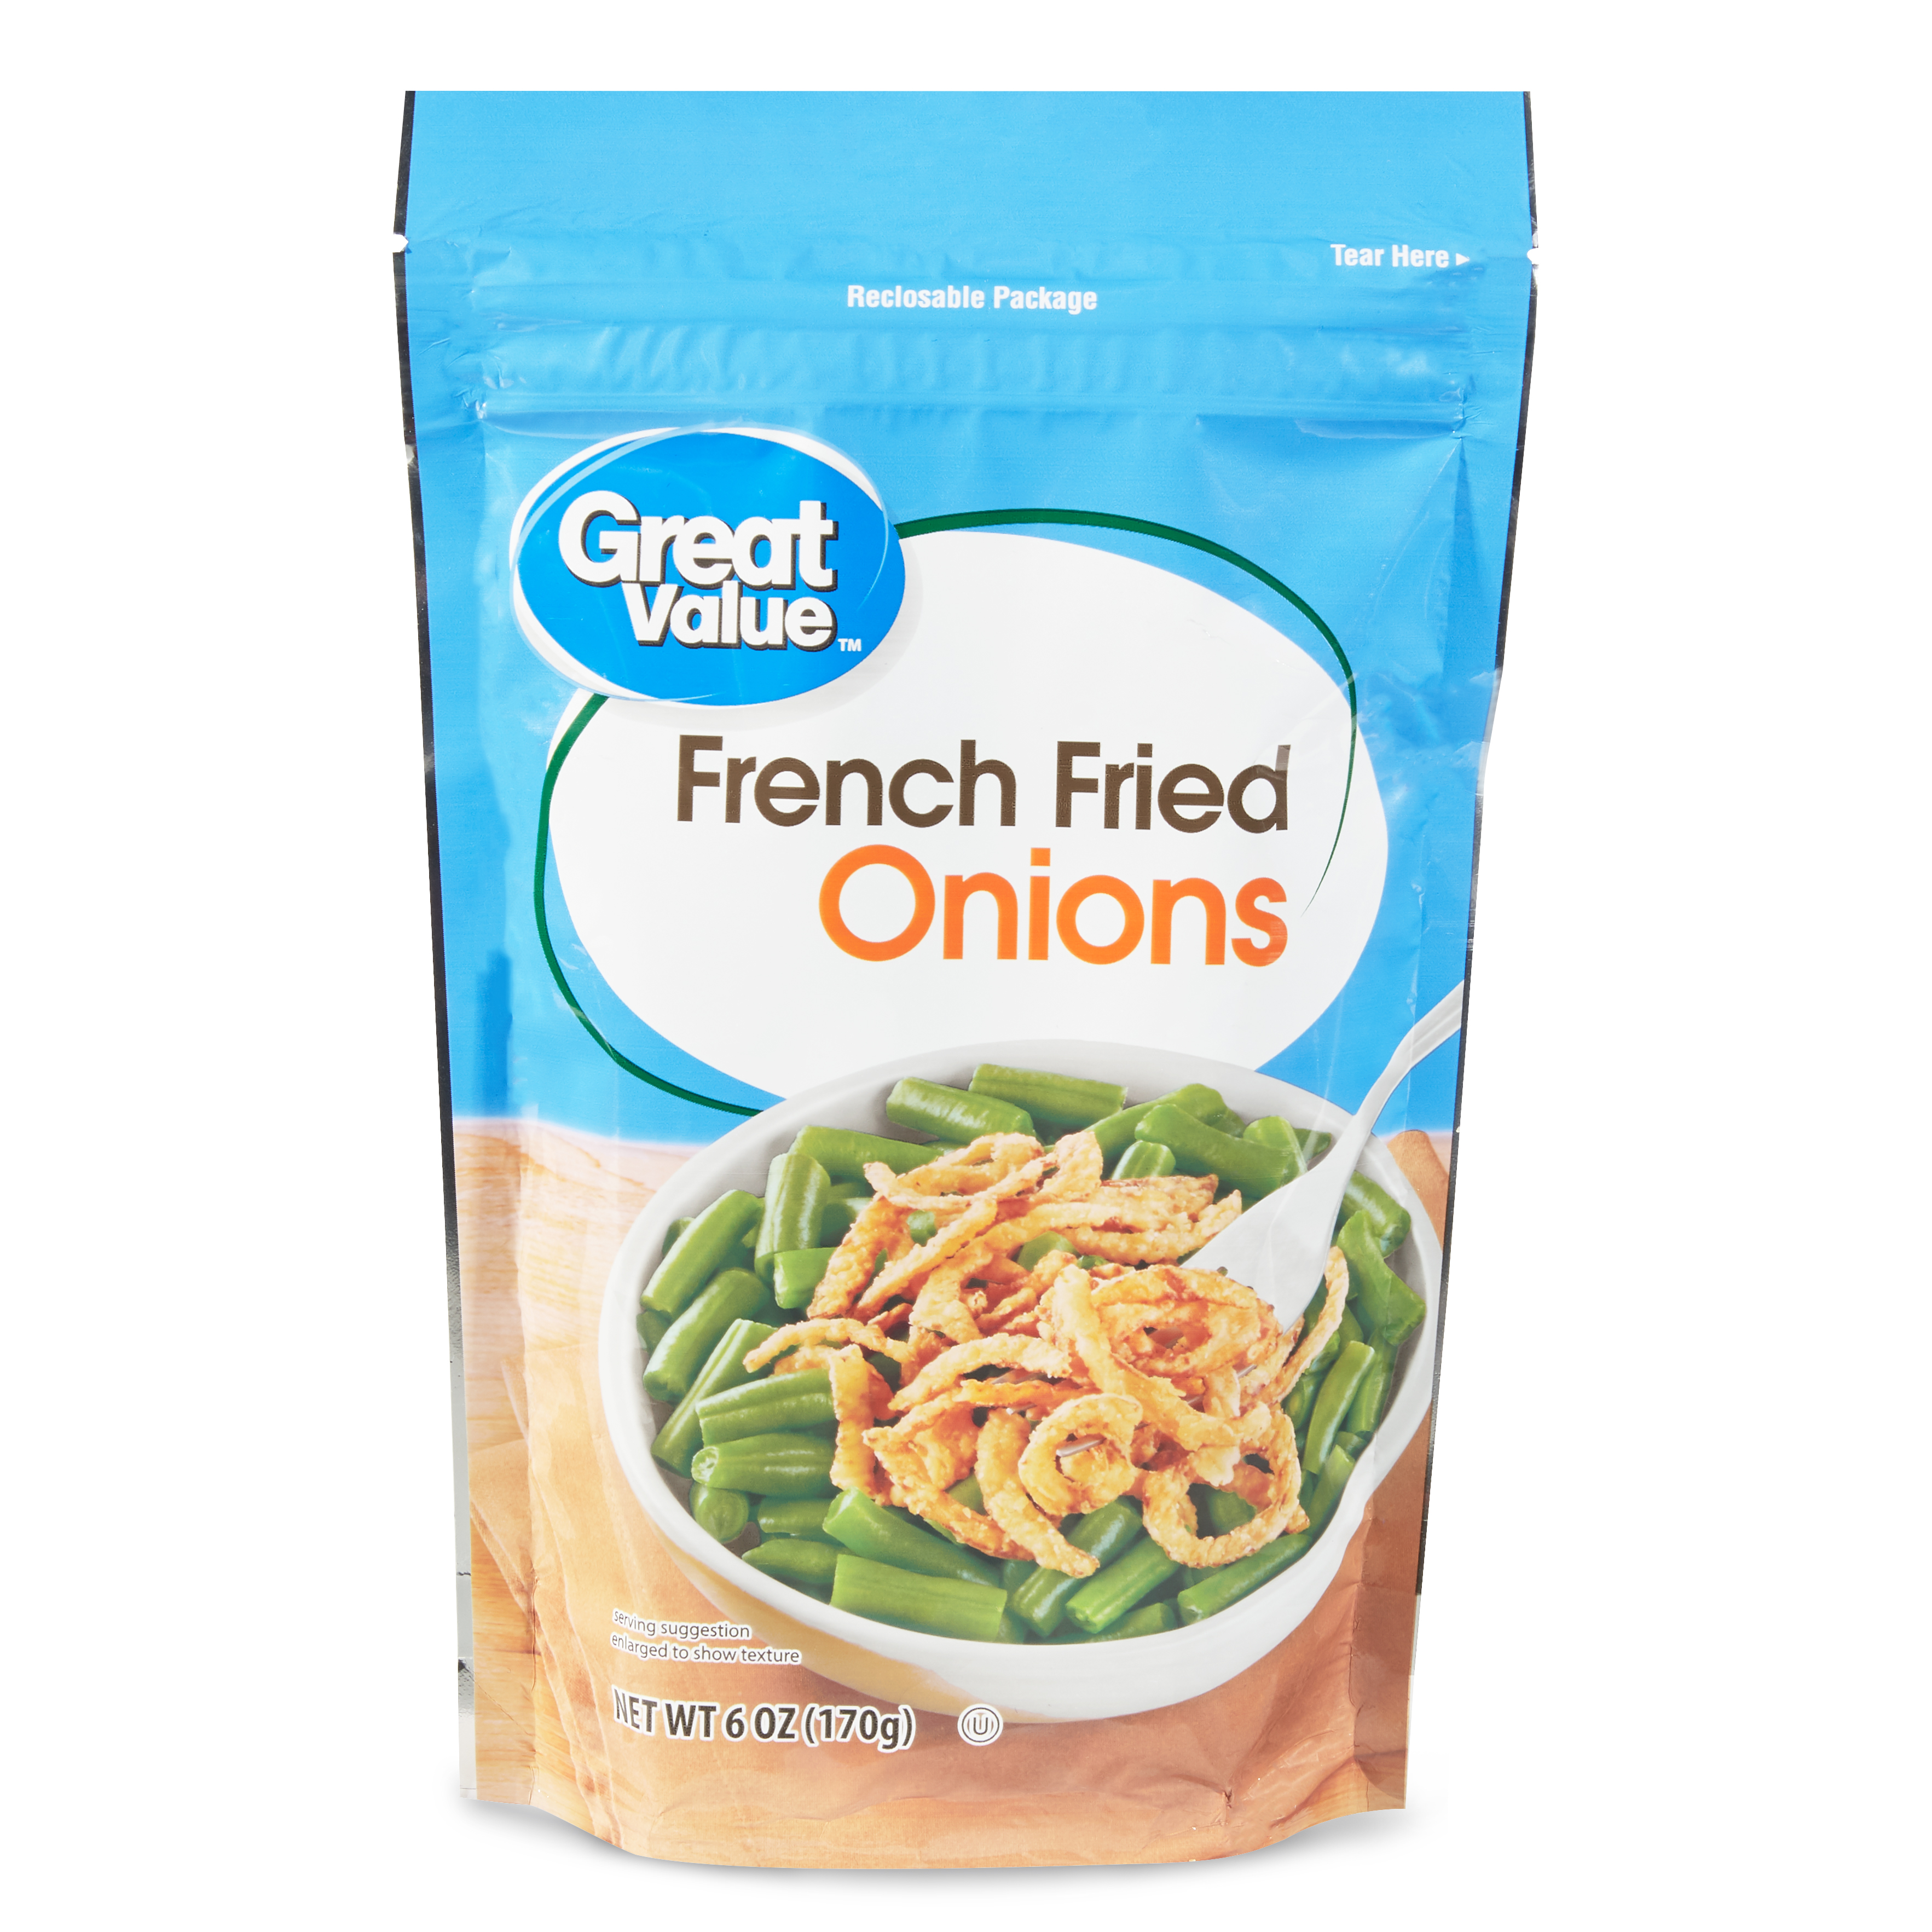 Great Value French Fried Onions, 6 Oz Image